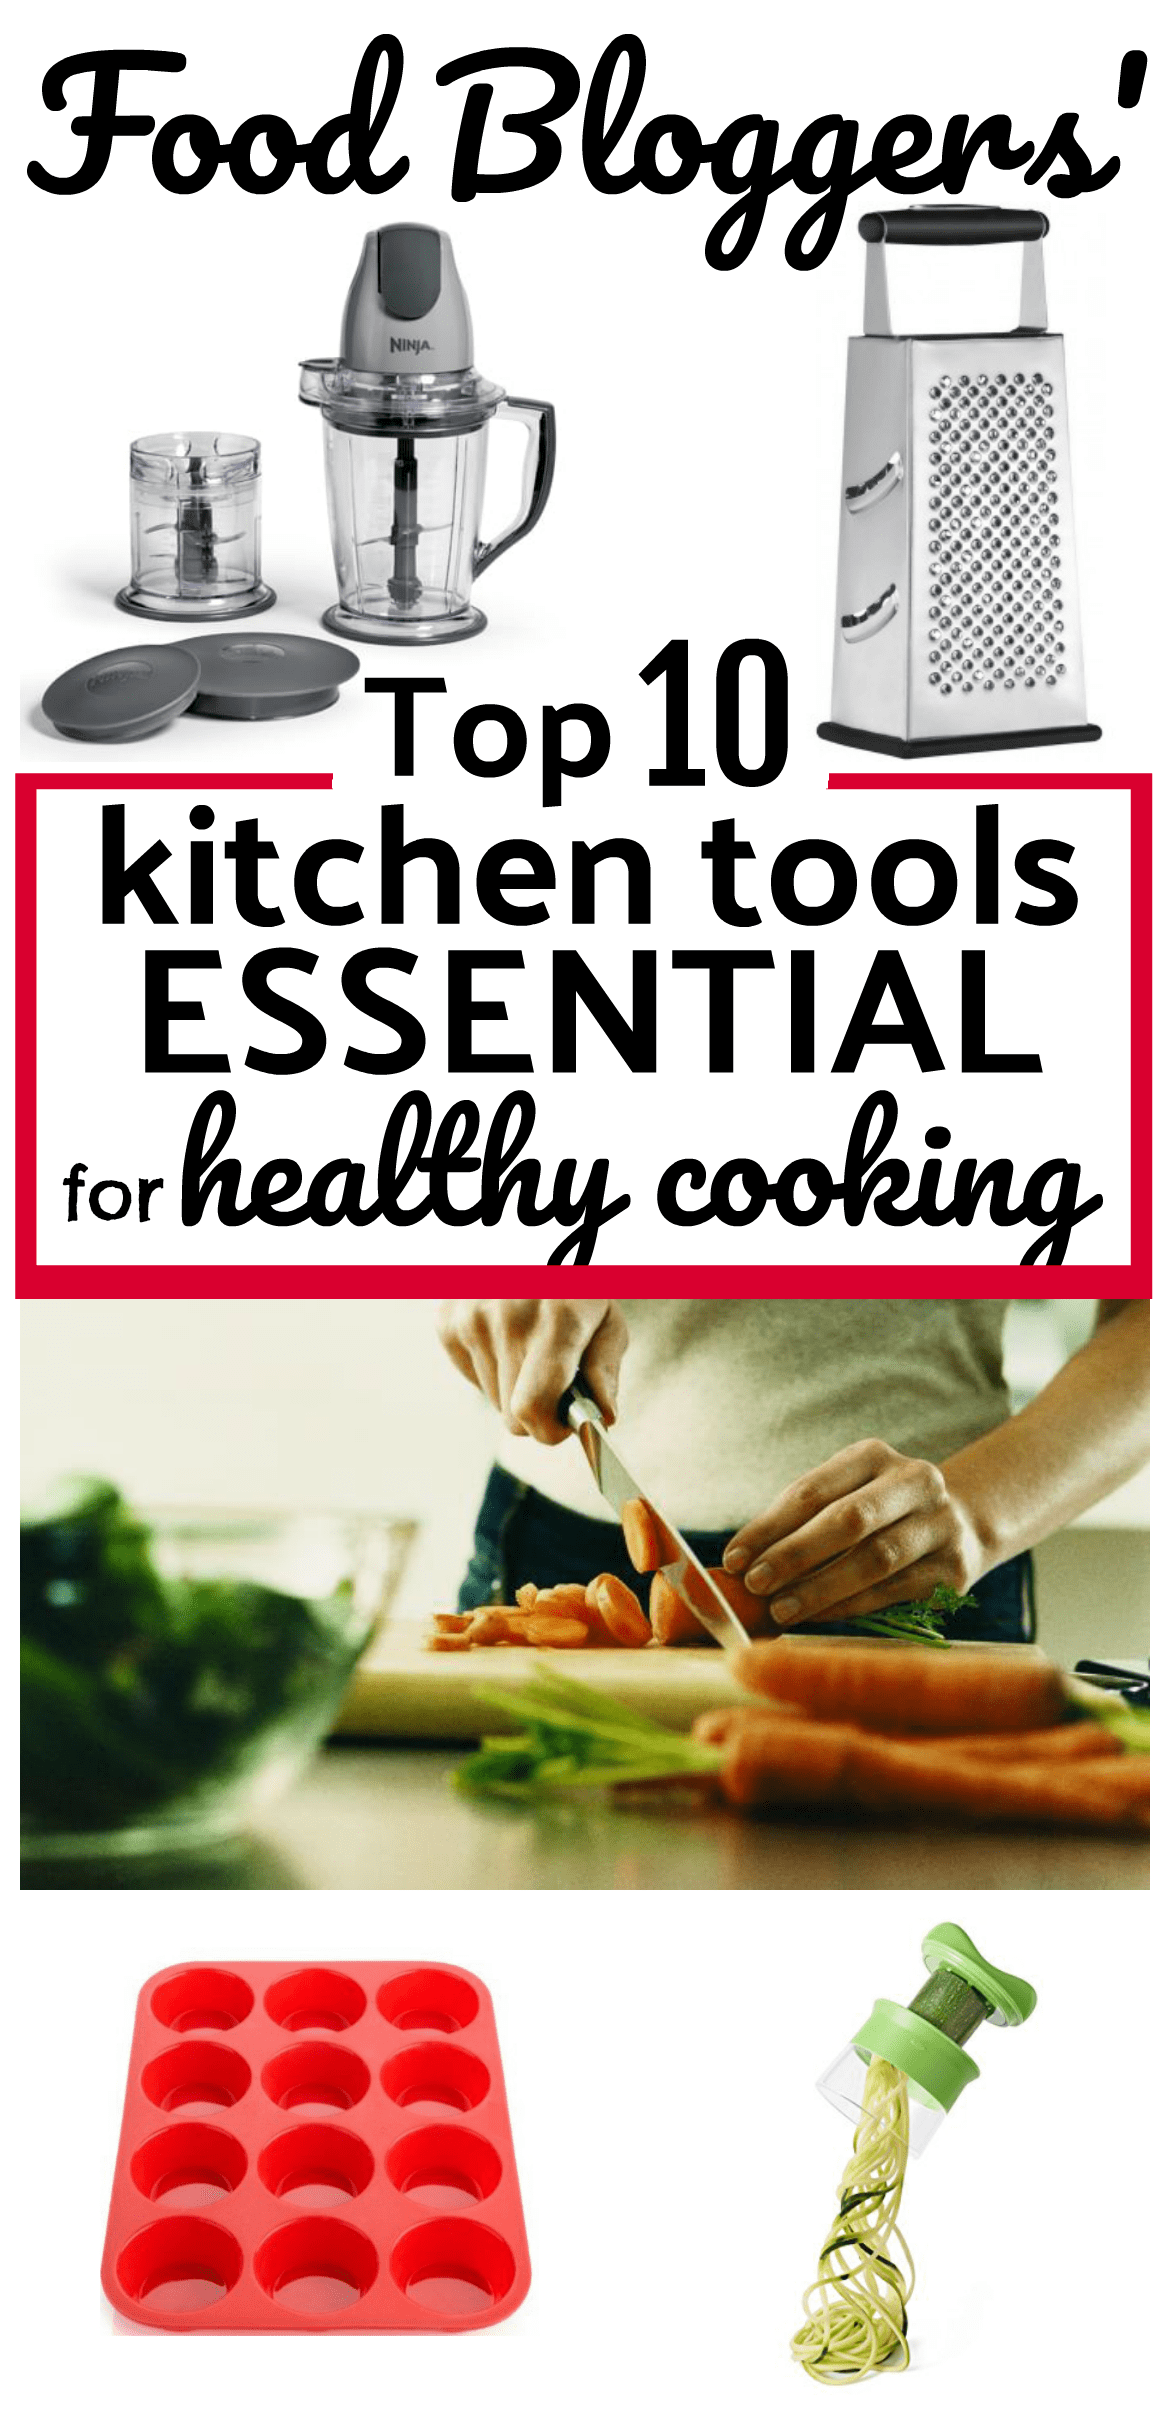 https://www.neuronsandnourishment.com/wp-content/uploads/2018/05/Top-10-Kitchen-Tools-for-Healthy-Cooking.png